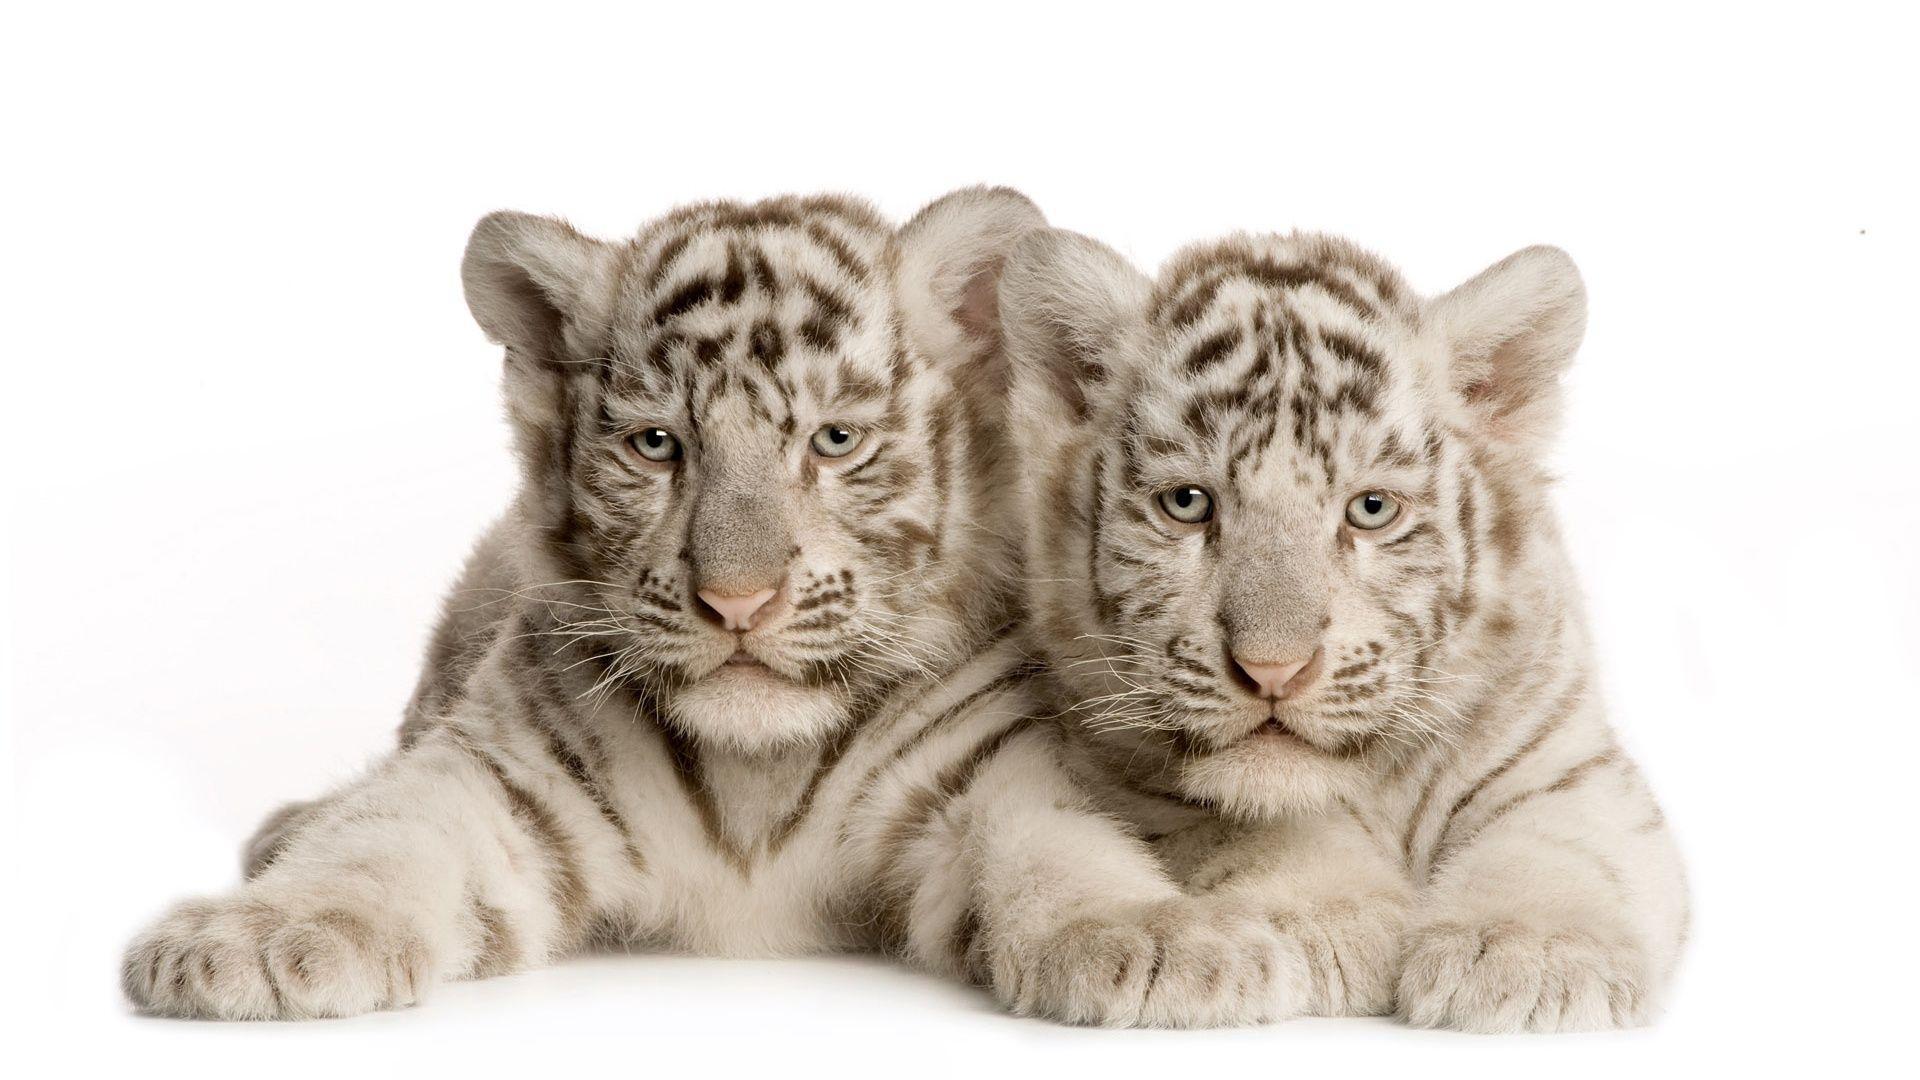 Wallpaper For > White Tiger Cubs Wallpaper In Snow